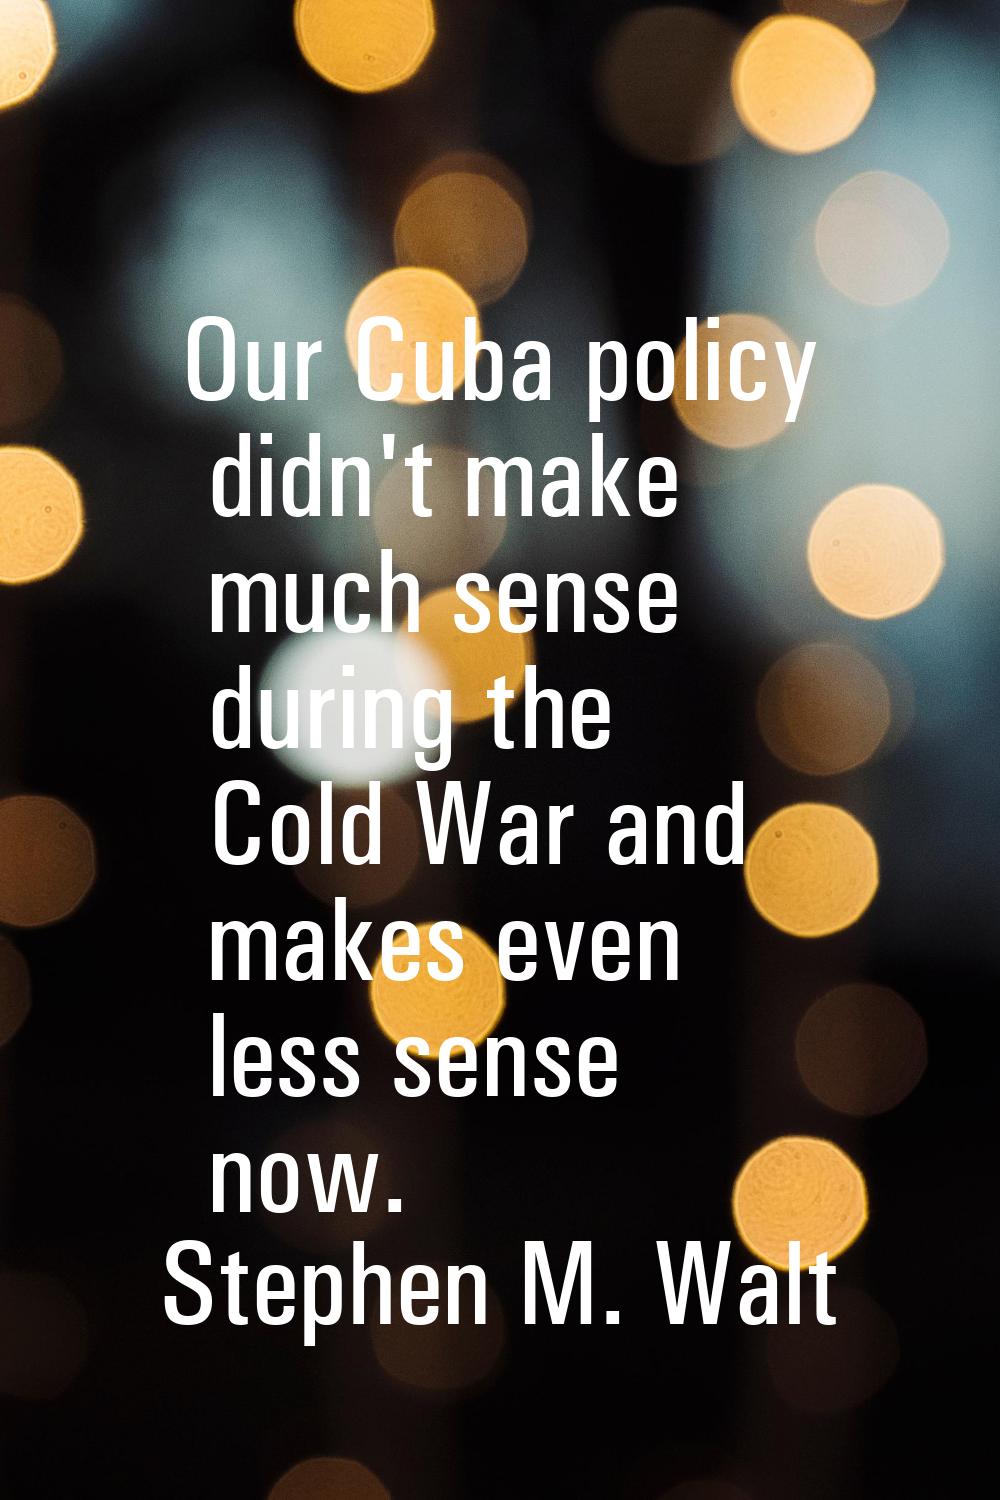 Our Cuba policy didn't make much sense during the Cold War and makes even less sense now.